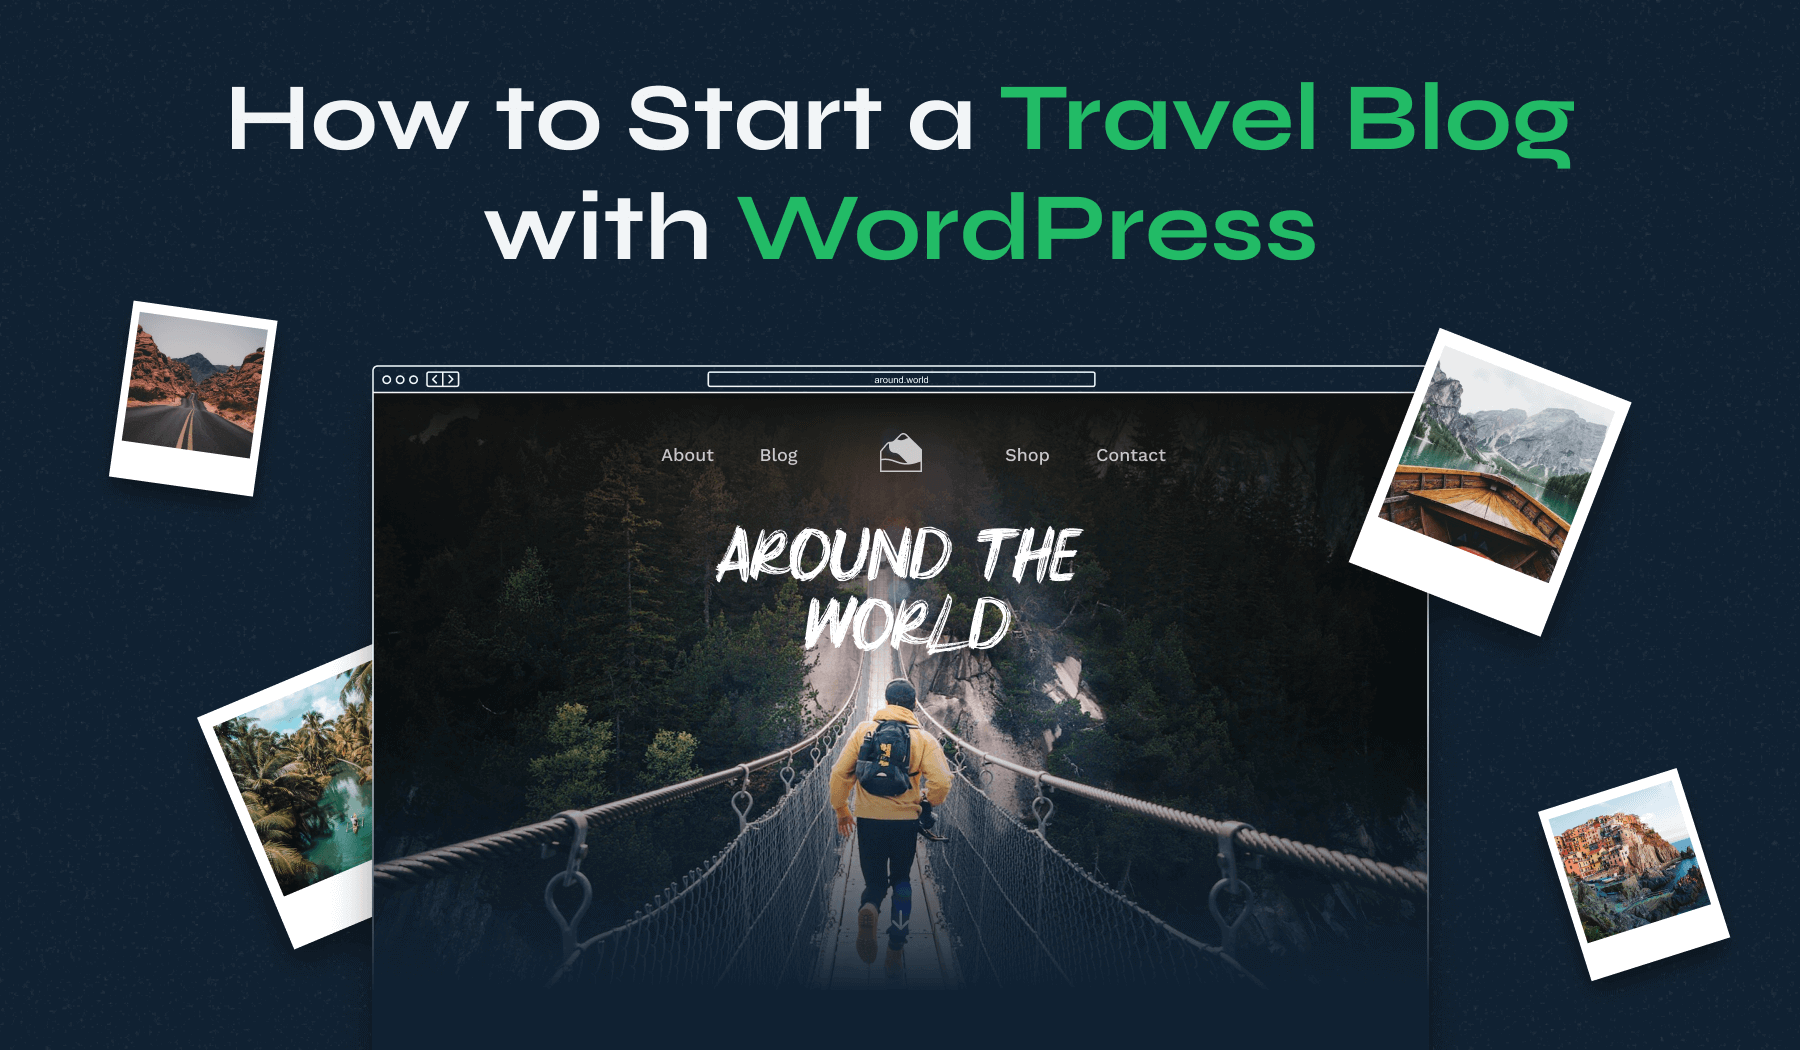 How to Start a Travel Blog